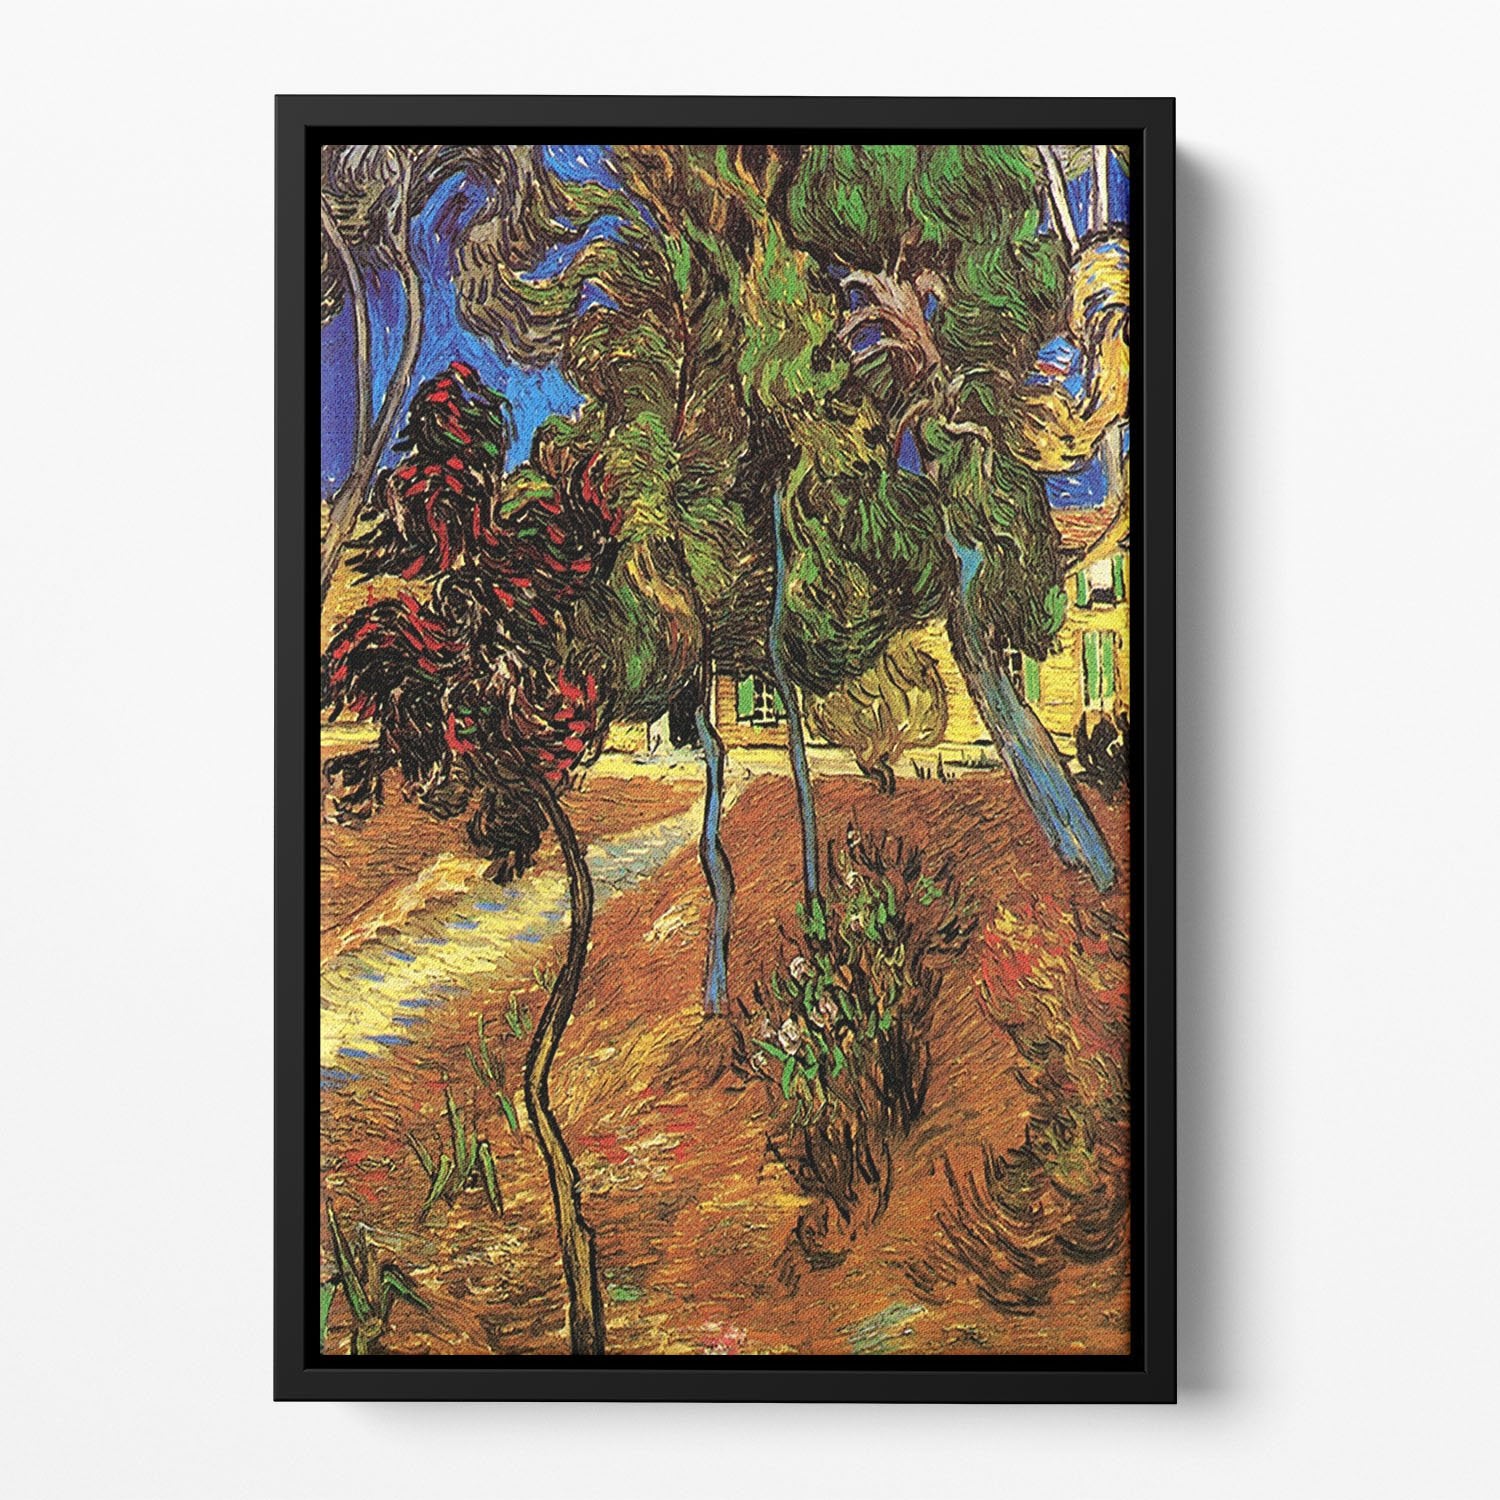 Trees in the Garden of Saint-Paul Hospital 2 by Van Gogh Floating Framed Canvas